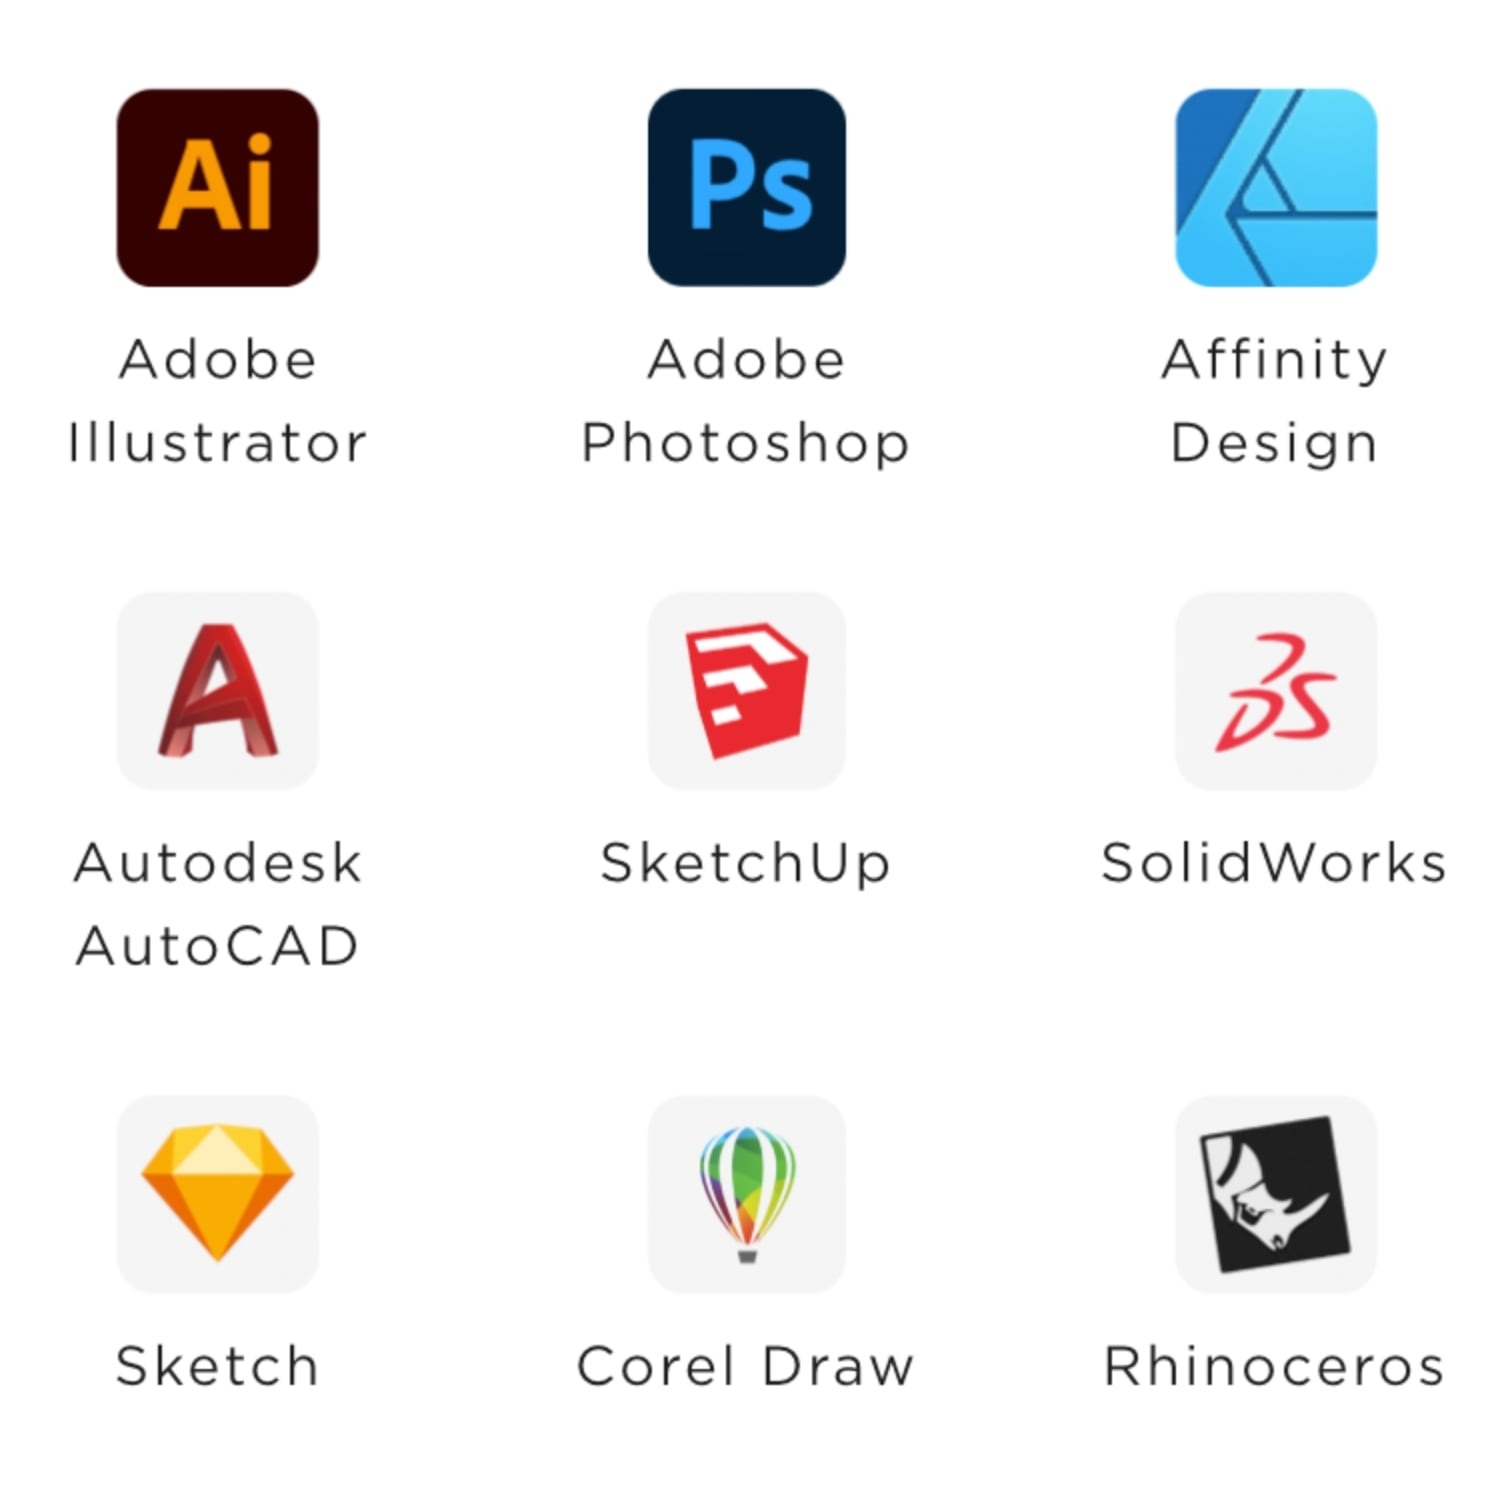 Icons and names of the supported softwares. From left to right and top to bottom: Adobe Illustrator, Adobe Photoshop, Affinity Design, Autodesk AutoCAD, SketchUp, SolidWorks, Sketch, Corel Draw, Rhinoceros.